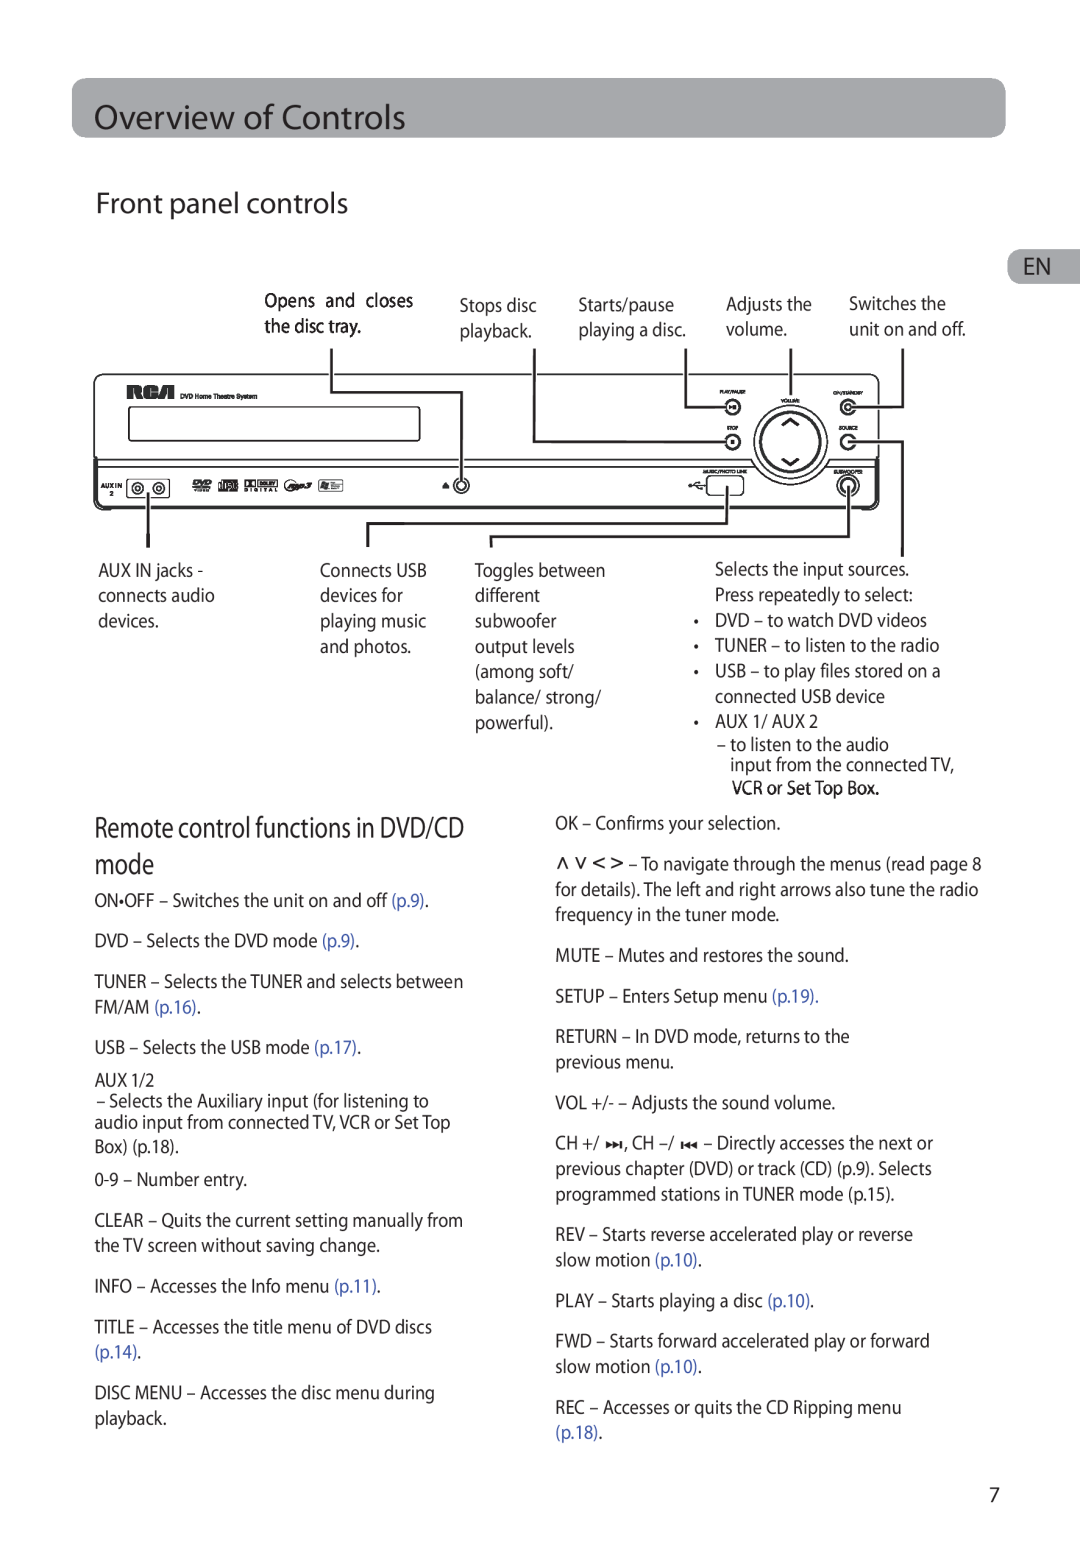 RCA RTD317 user manual Overview of Controls, Front panel controls, Remote control functions in DVD/CD mode 